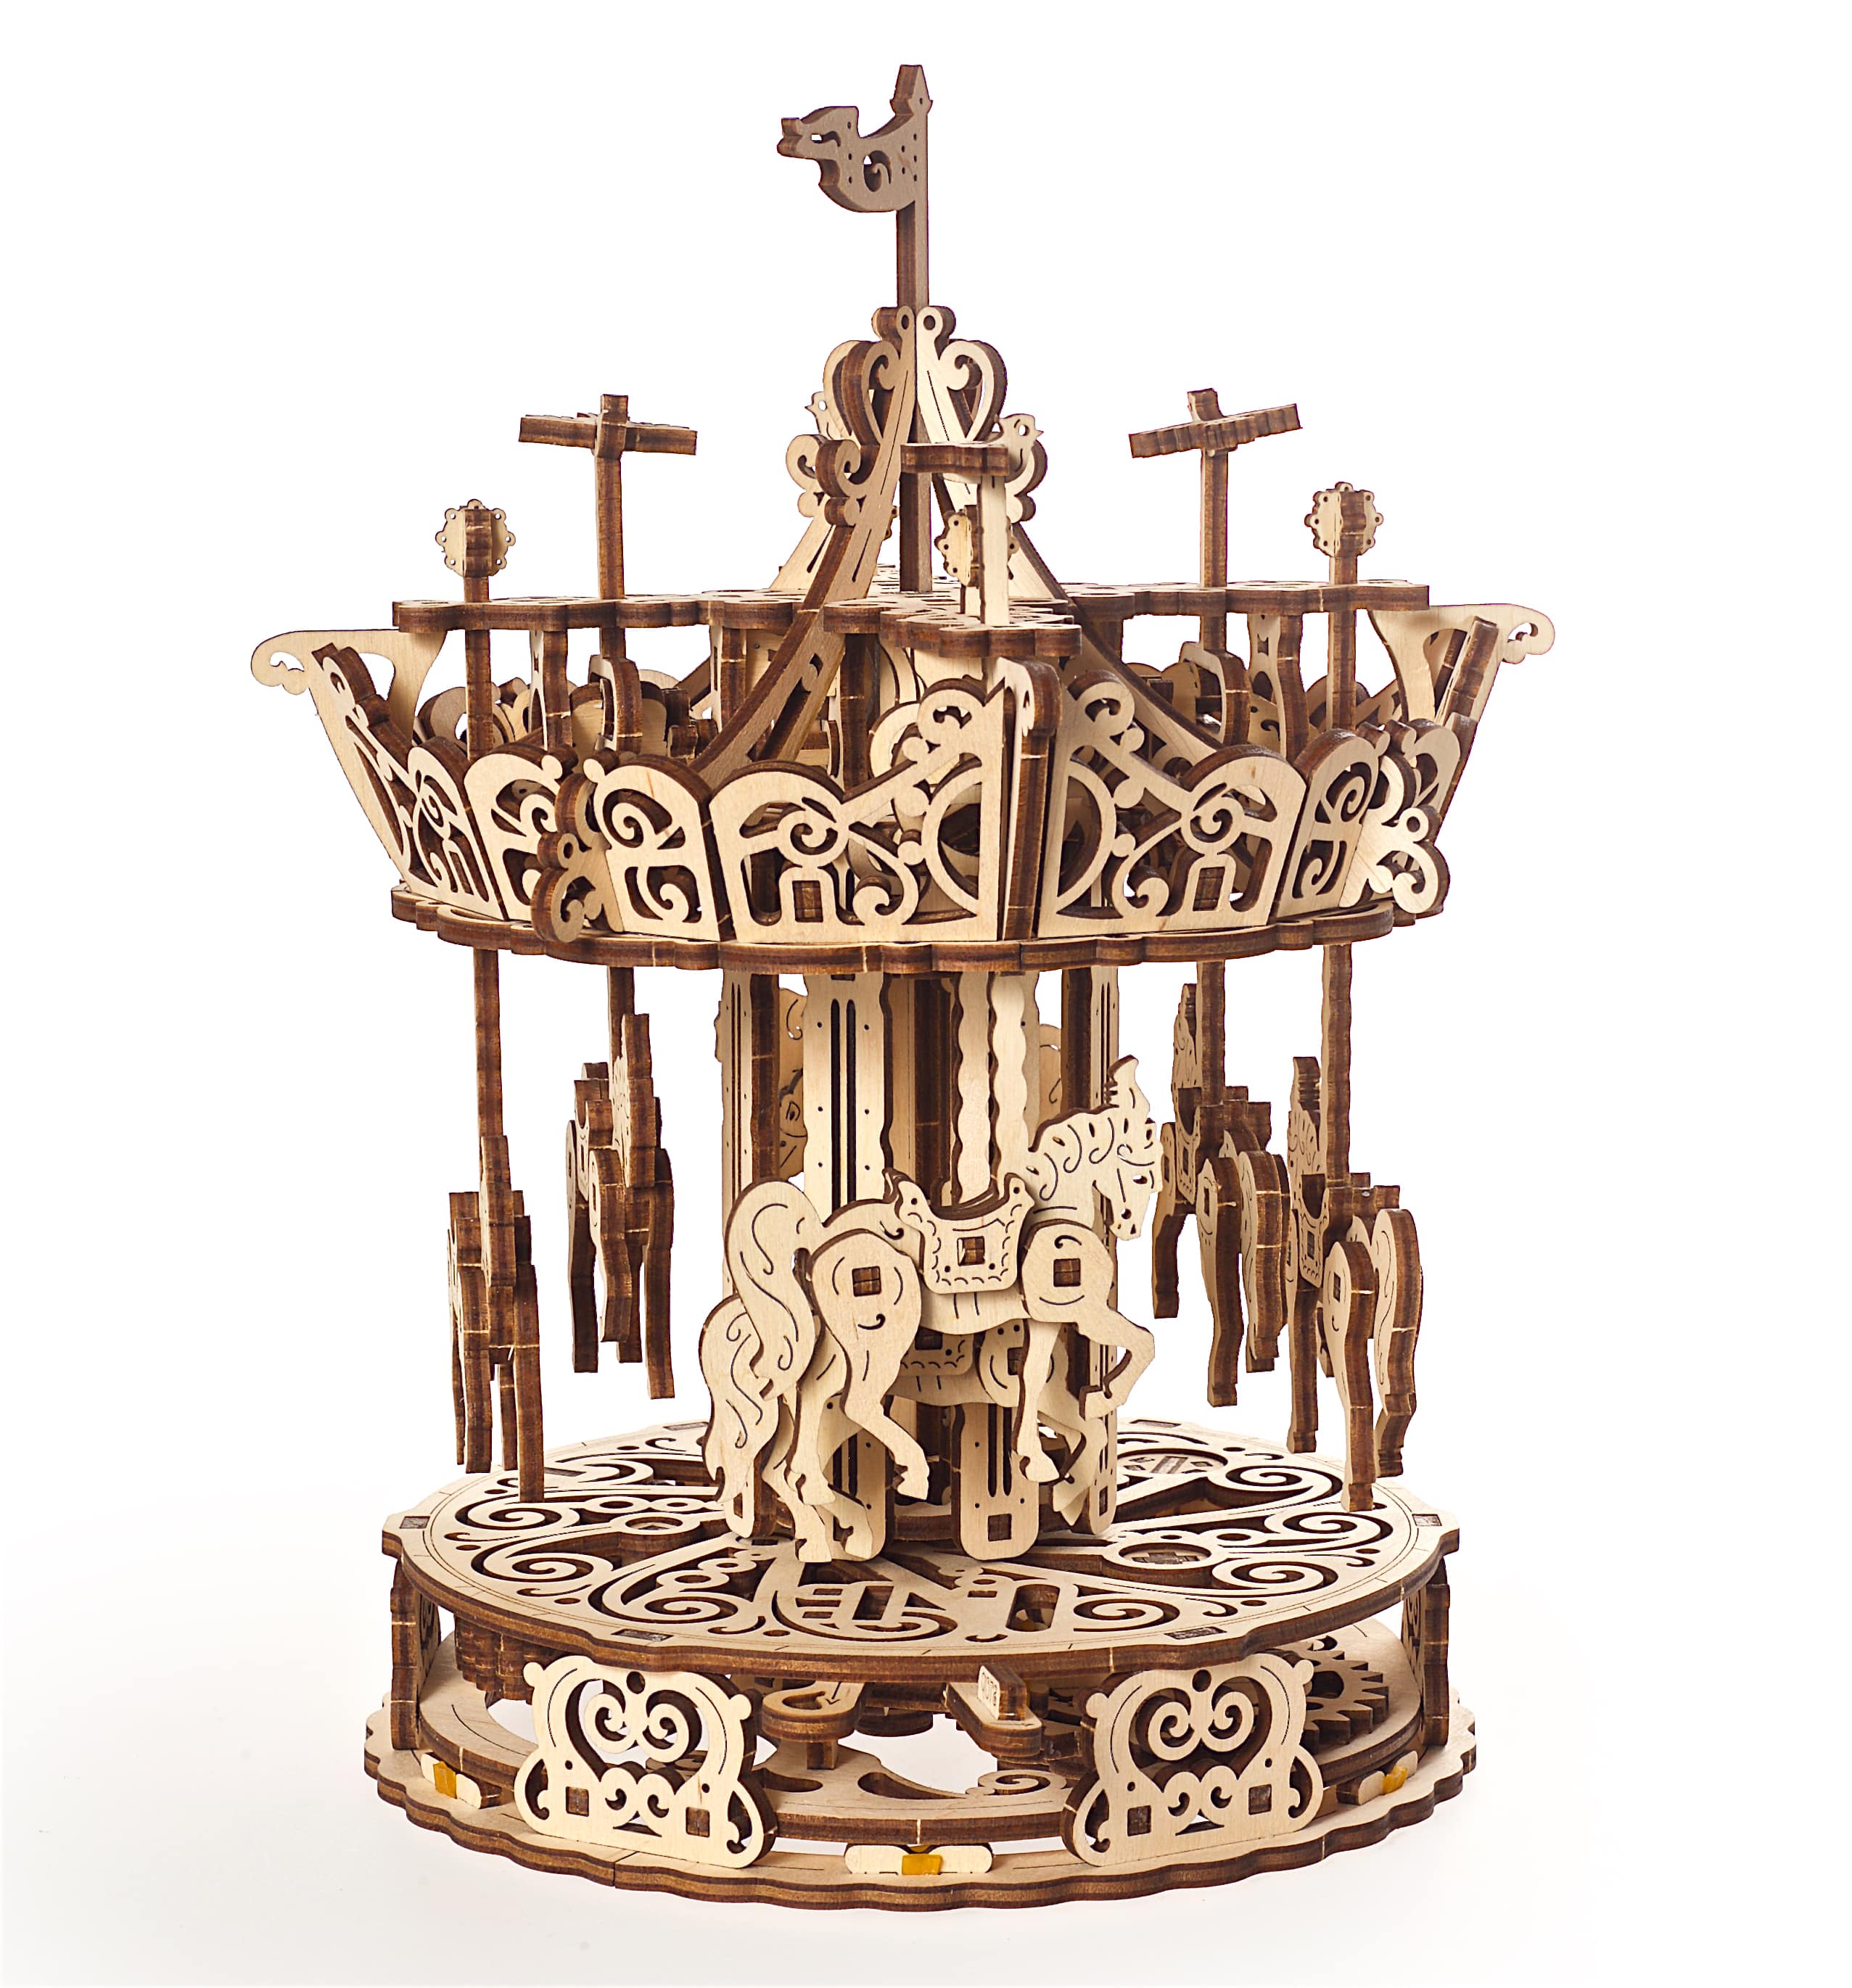 Fuego Cloud 3D Wooden Mechanical DIY Model Kit Carousel Front View